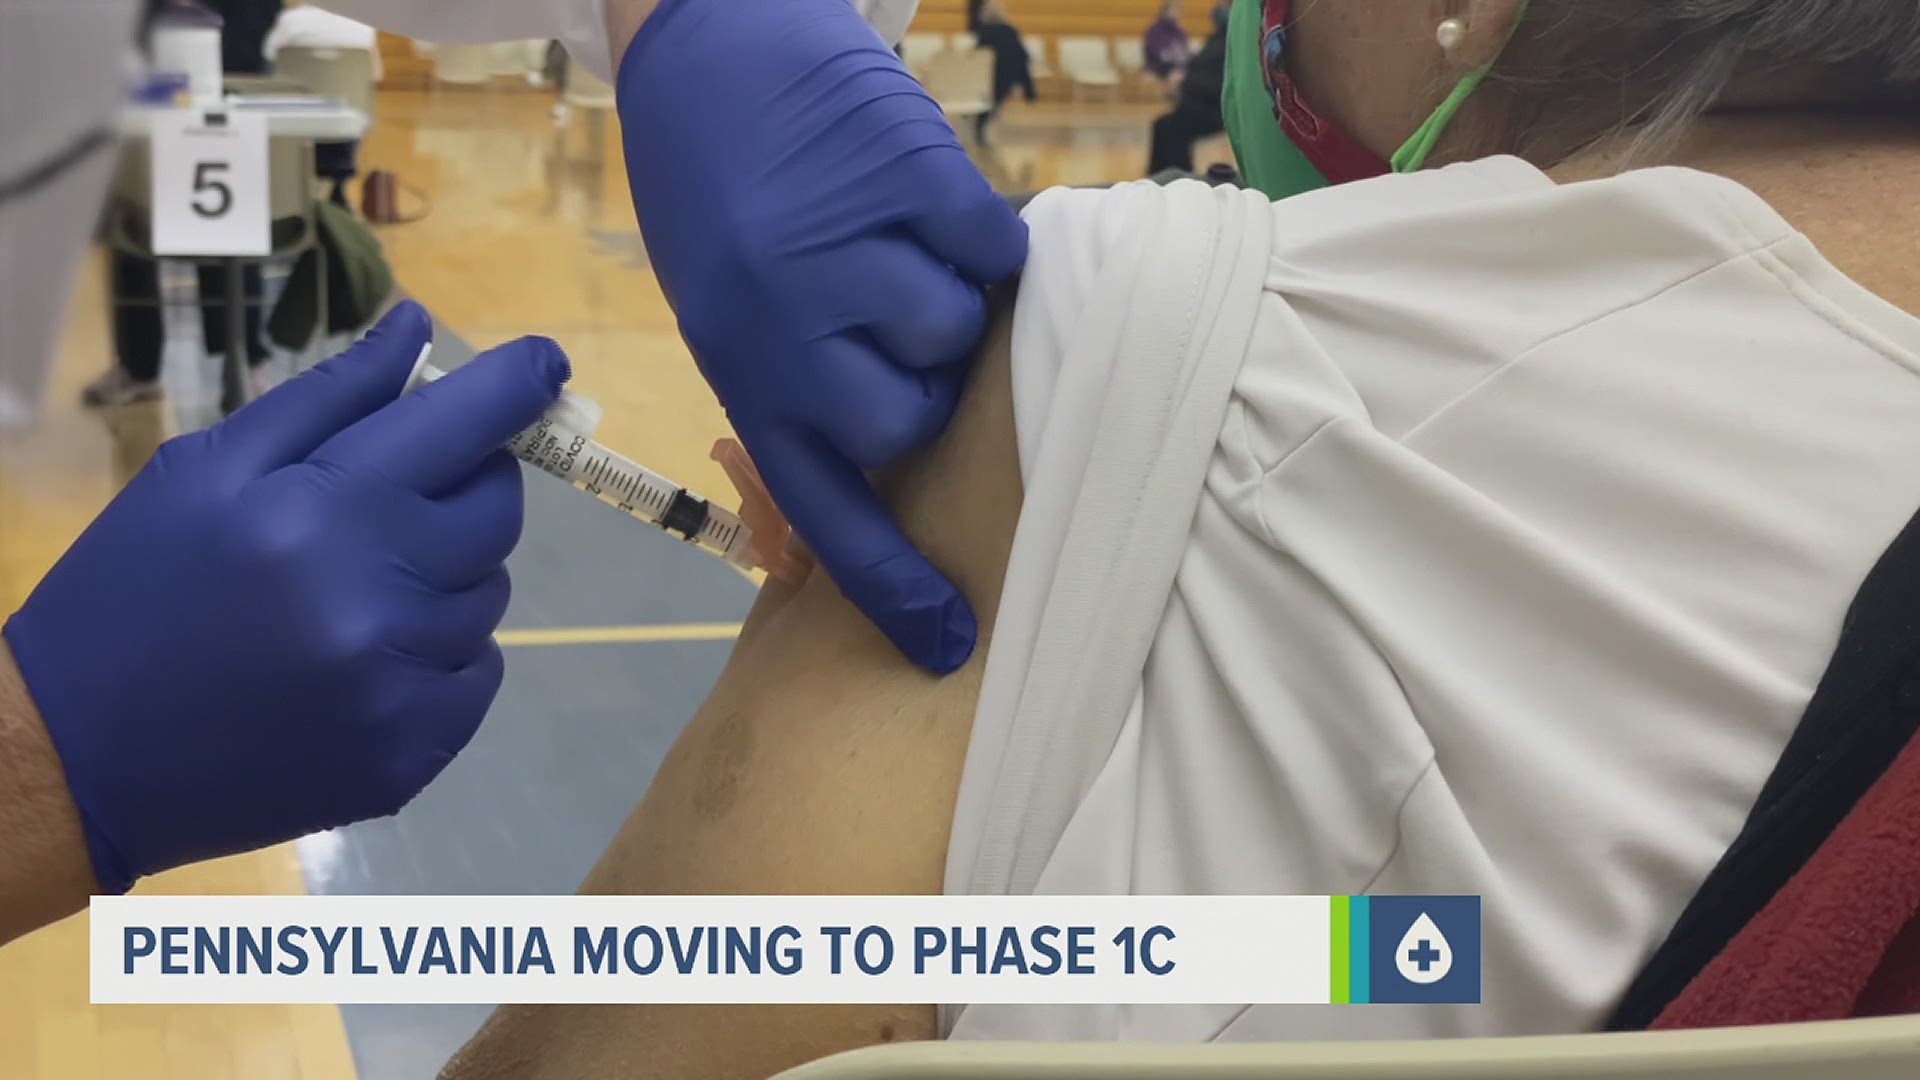 Food service workers are among the Pennsylvanians who will become eligible for the vaccine when the state moves into Phase 1C on April 12.